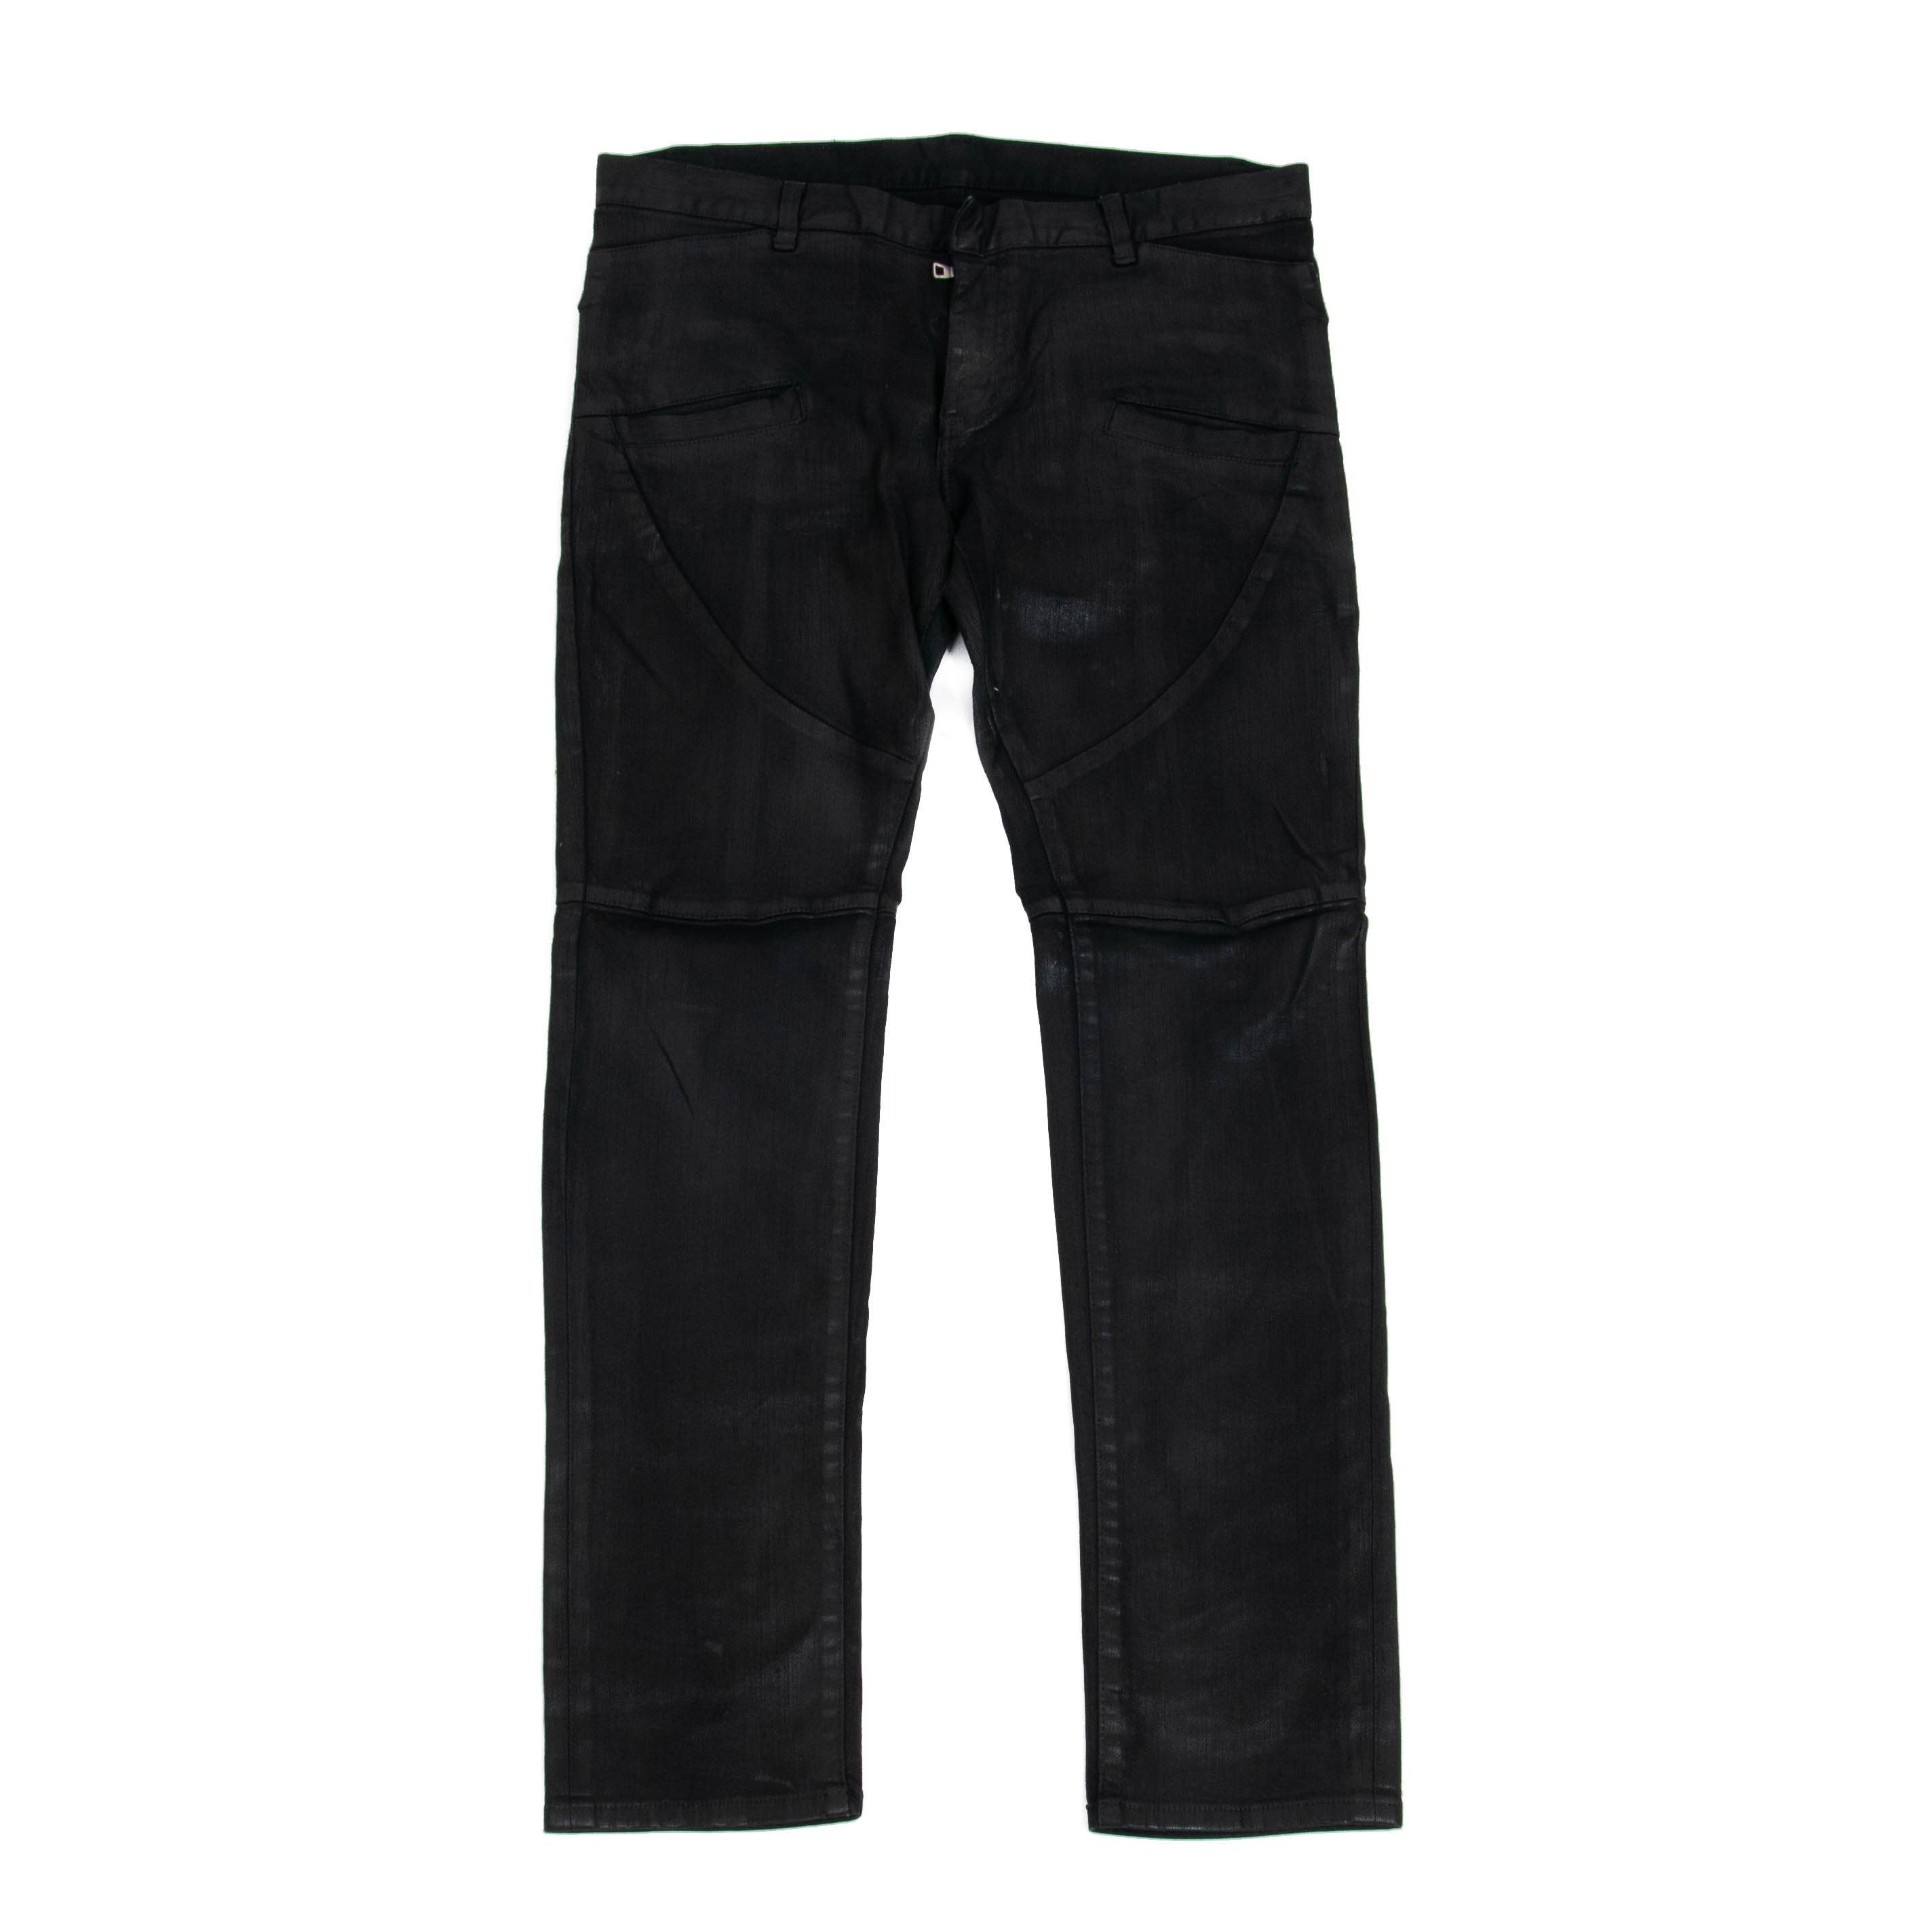 Black Waxed Stretch | Naked & Famous Denim